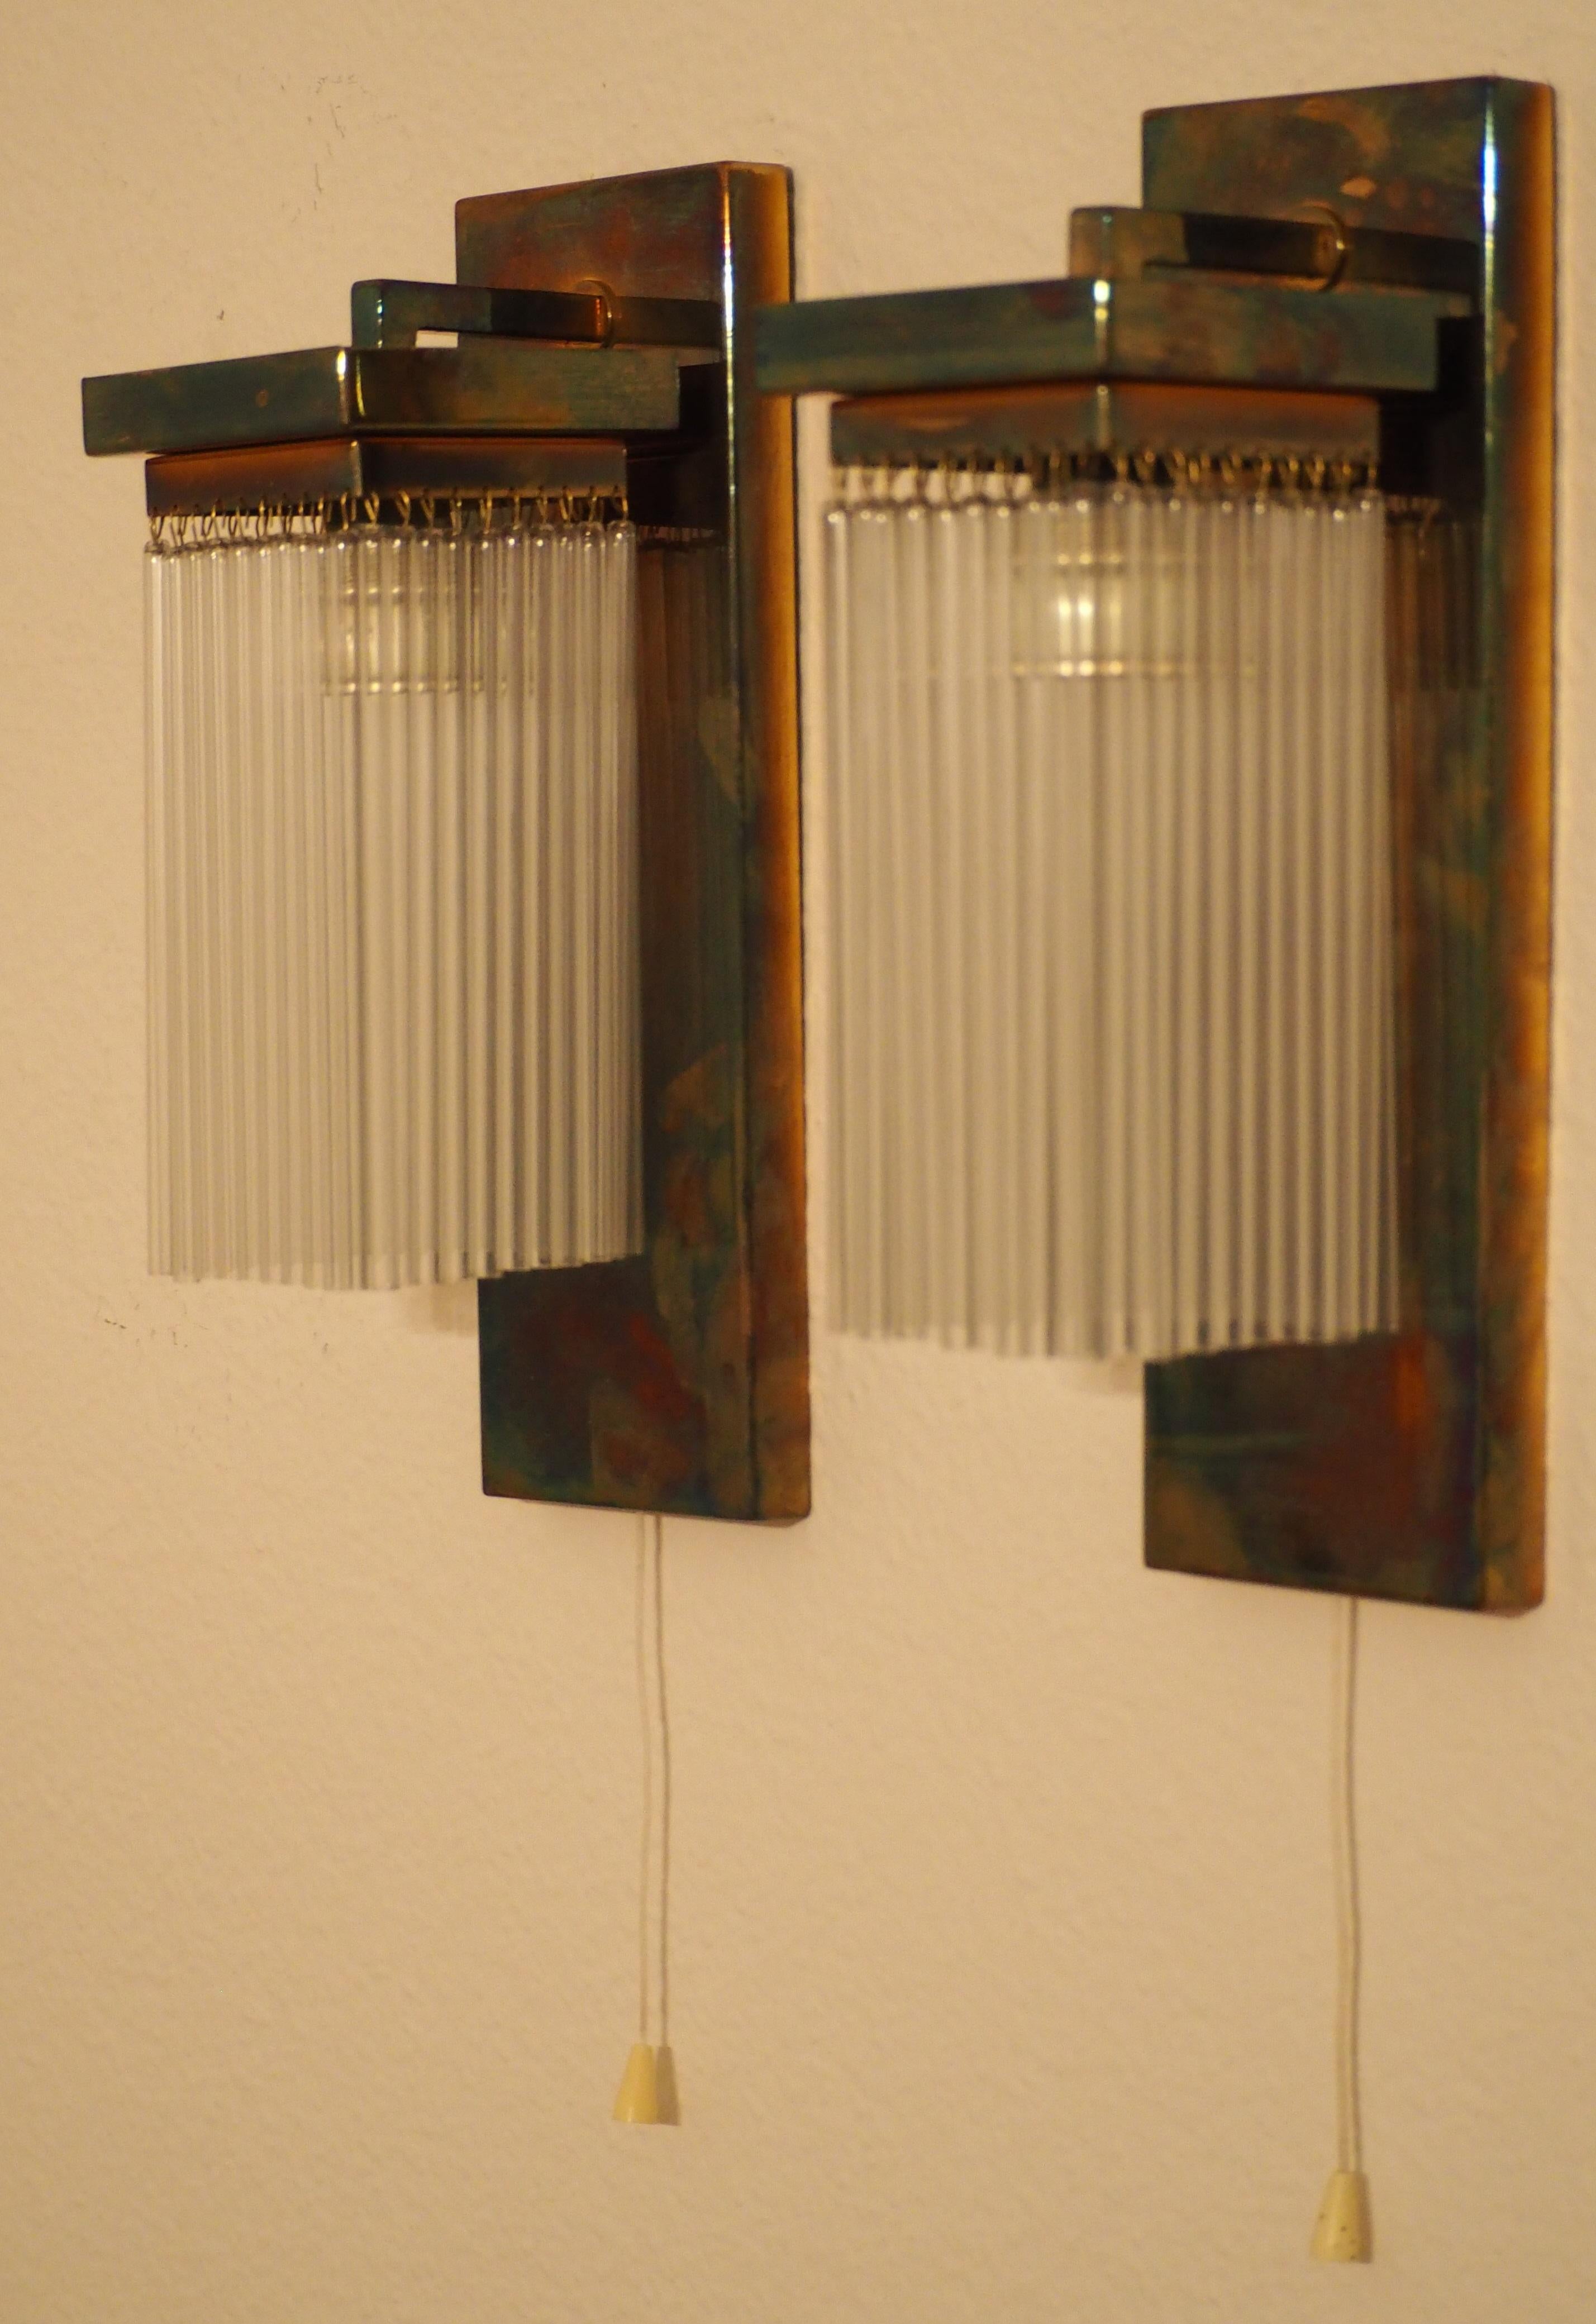 Jugendstil Pair of Brass and Glass Wall Sconces, Koloman Moser, Otto Wagner Style, Vienna